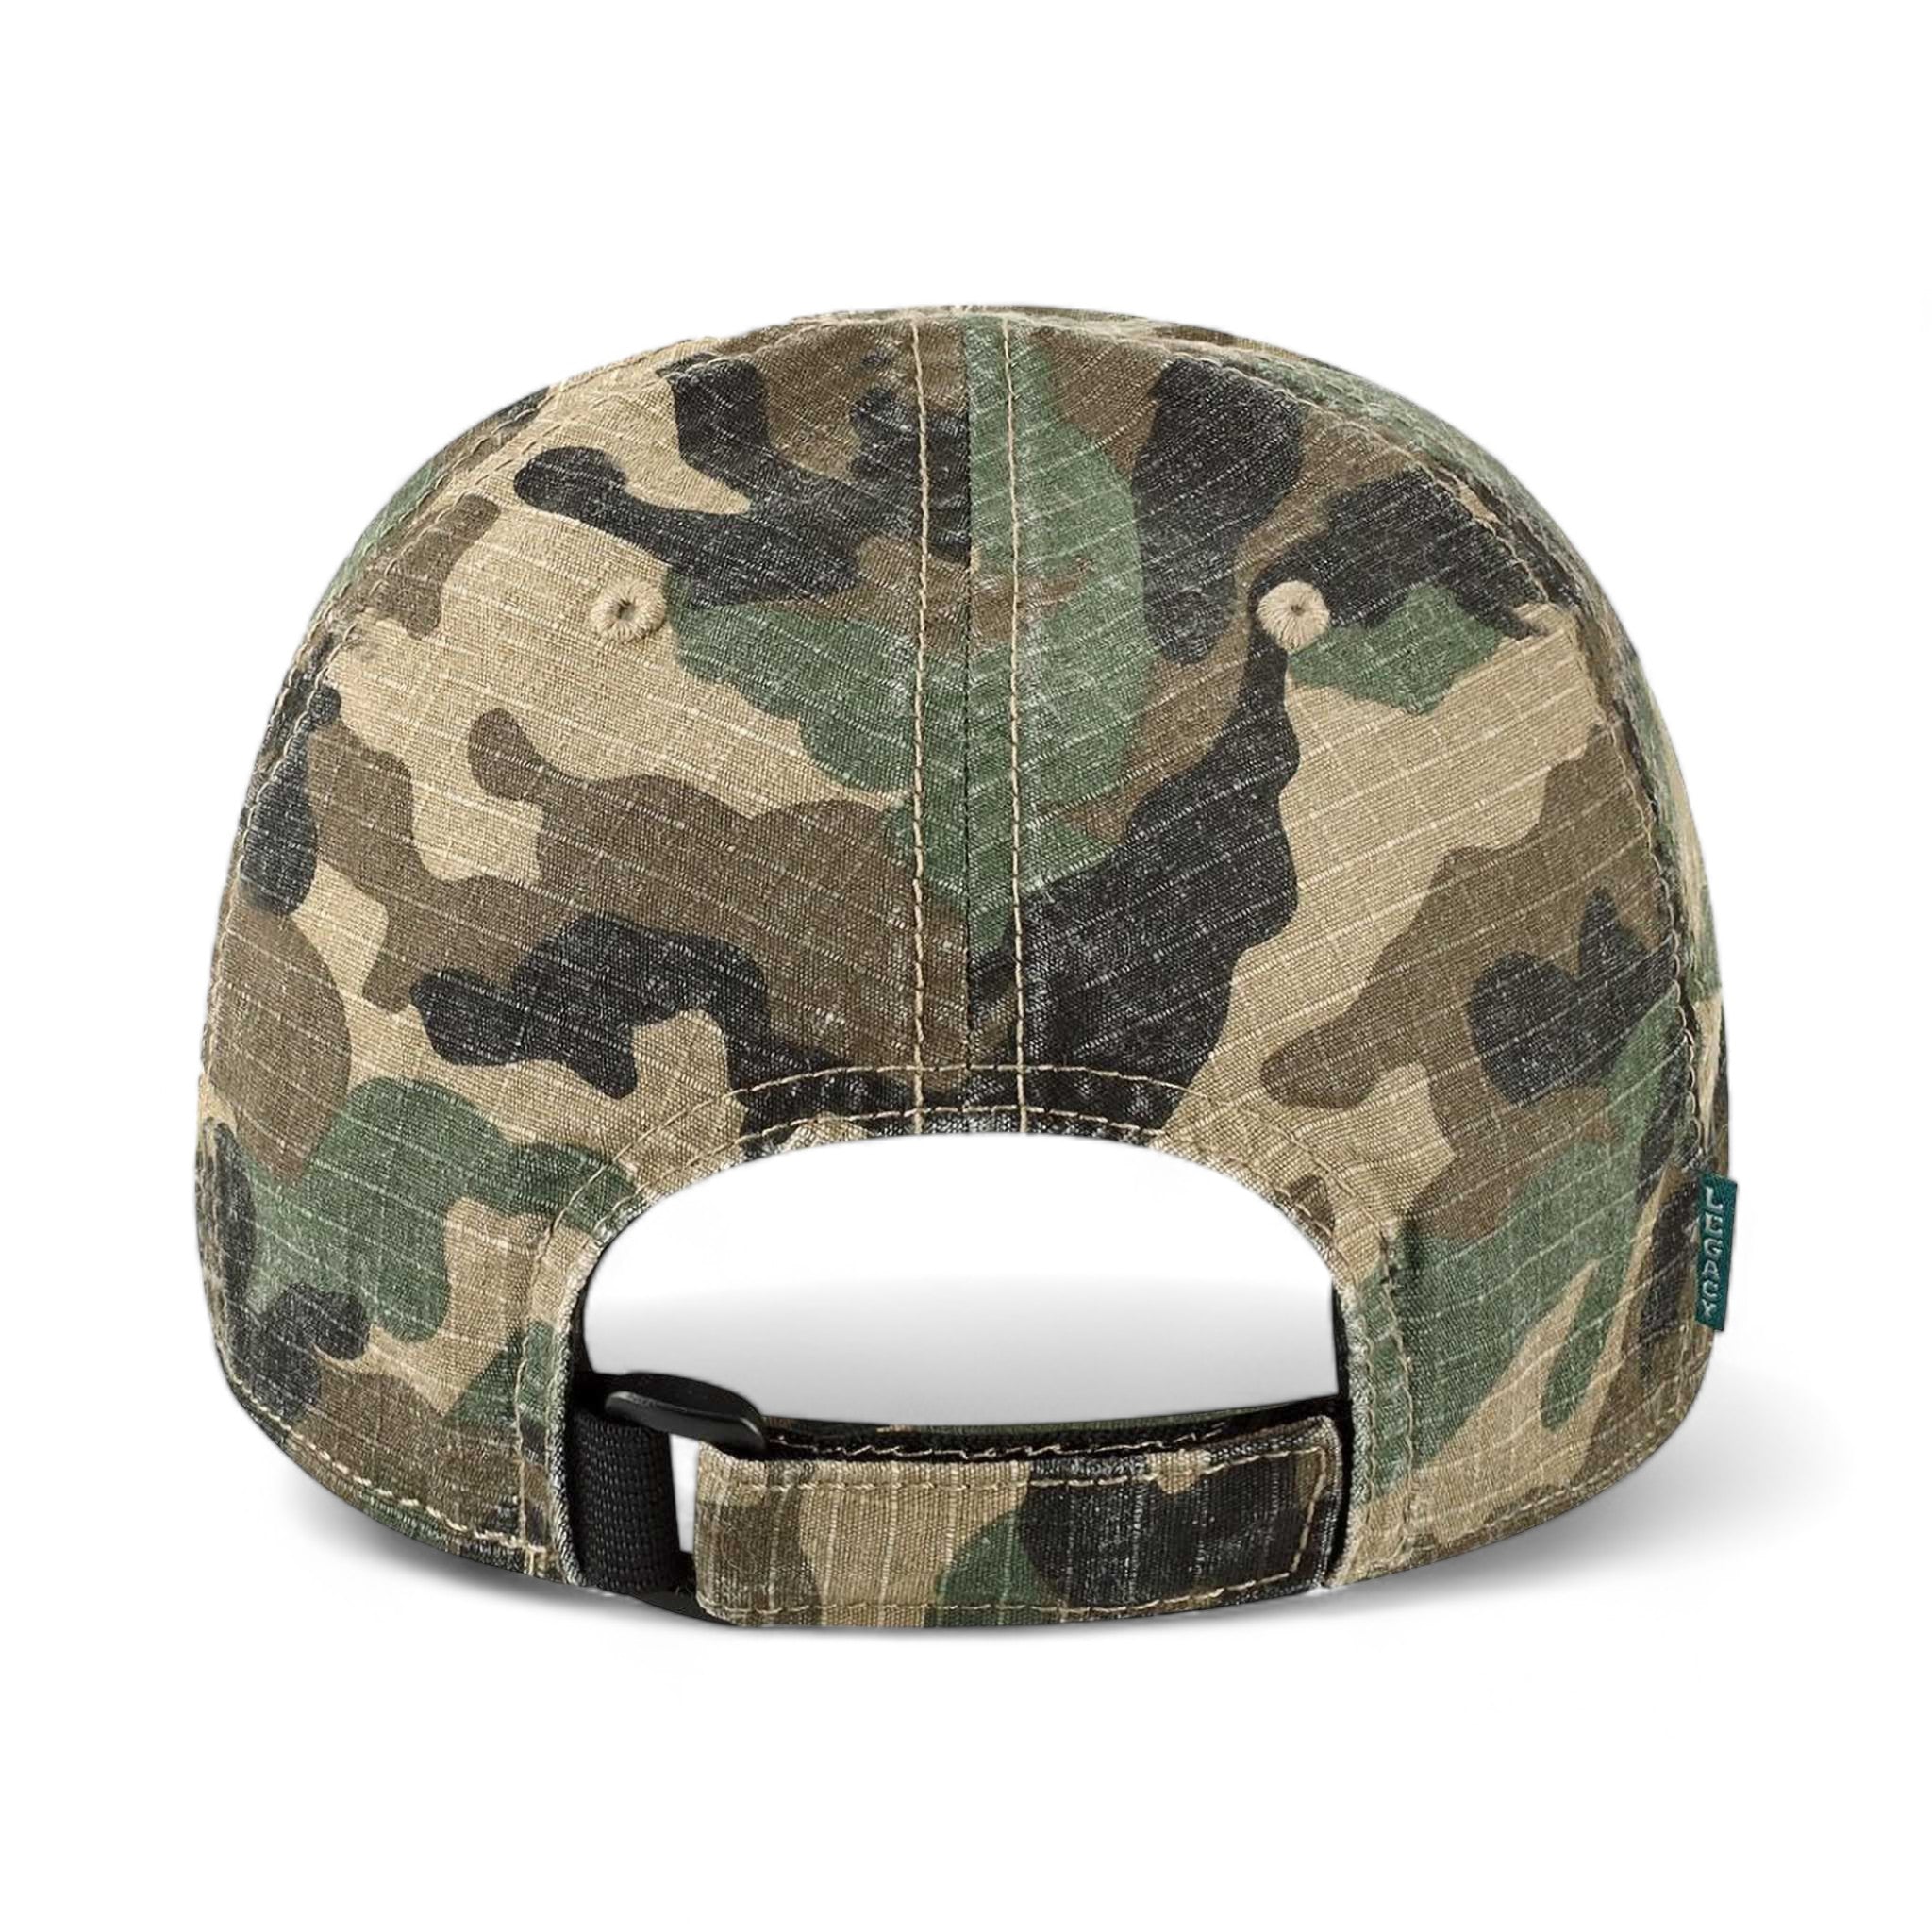 Back view of LEGACY TACT custom hat in army camo